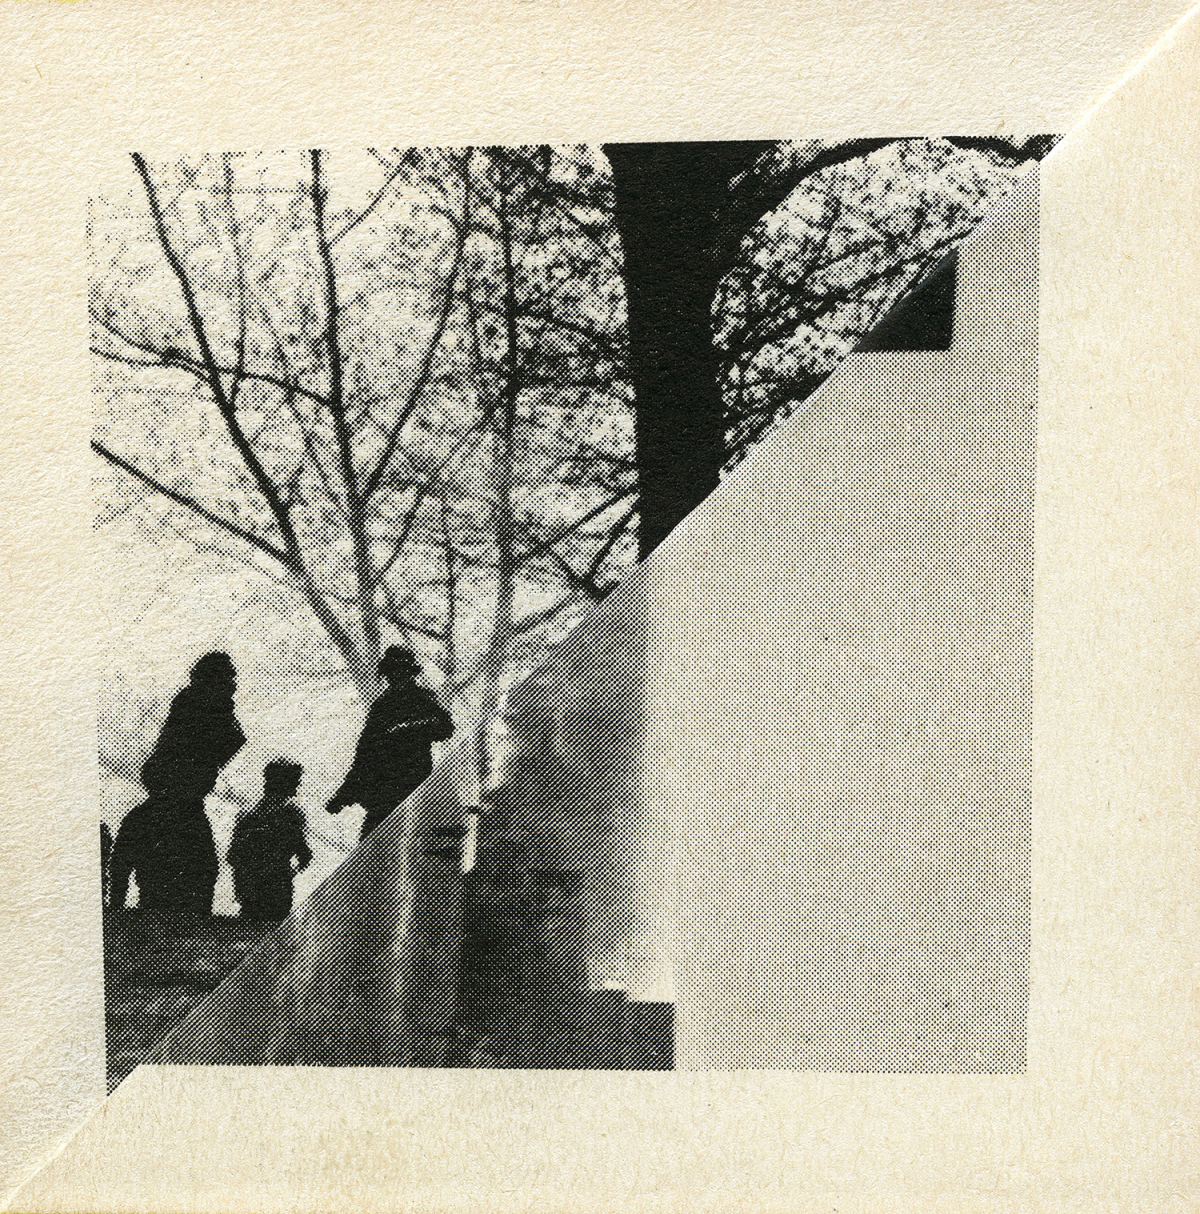 Image of the folded corner of the yellowed page of a book with a a central black and white square of imagery made of two triangles, which is the result of the folding of the page, the imagery on the top shows several figures under barren trees, and the bottom is more blurred and abstract, perhaps a smokey landscape.